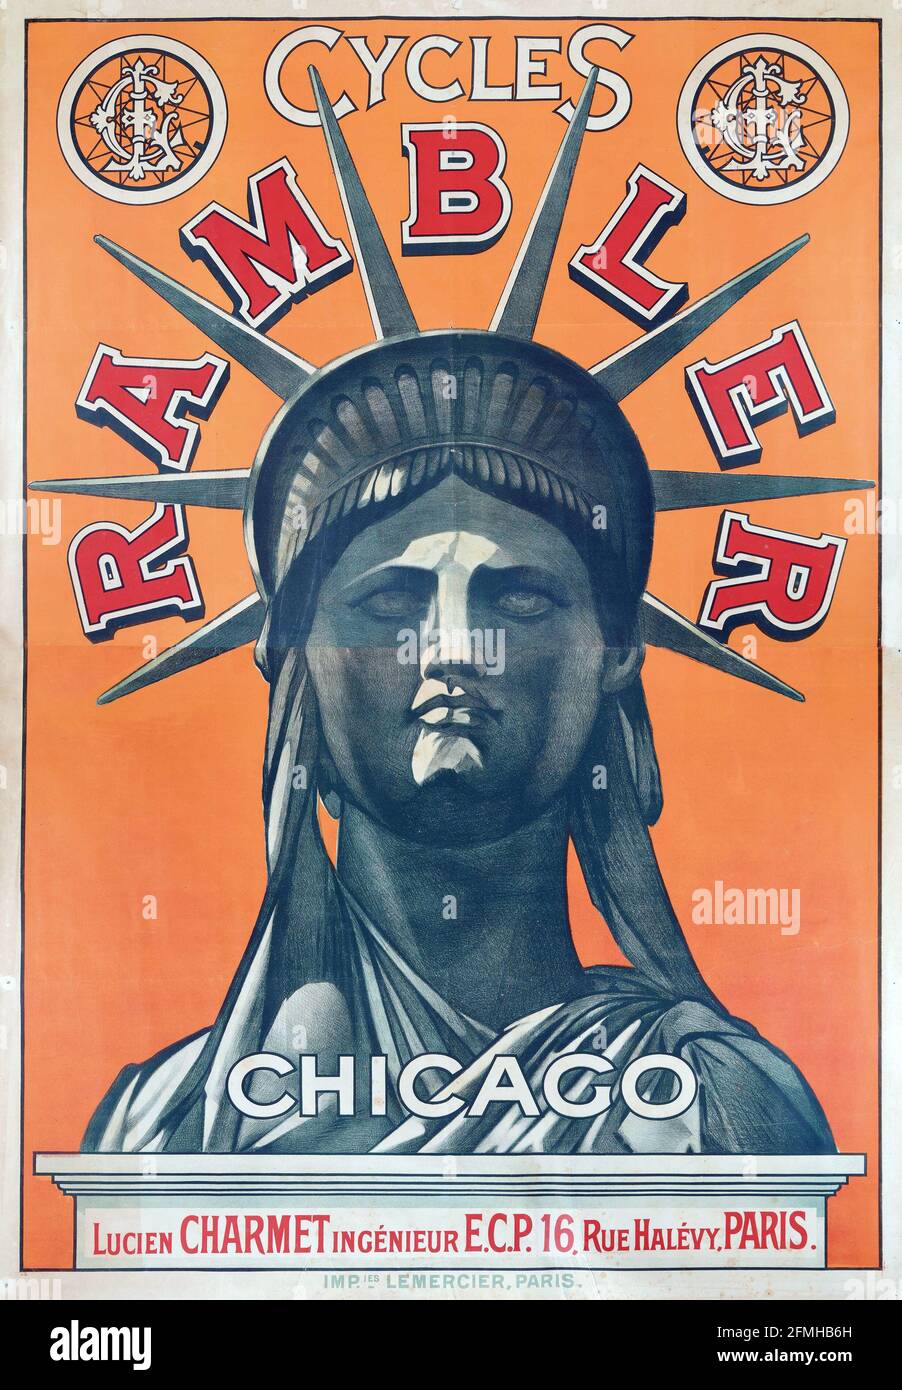 Rambler Cycles. Chicago / Paris. Bicycle advertisement poster. Old and vintage. Digitally enhanced. Statue of Liberty. Stock Photo